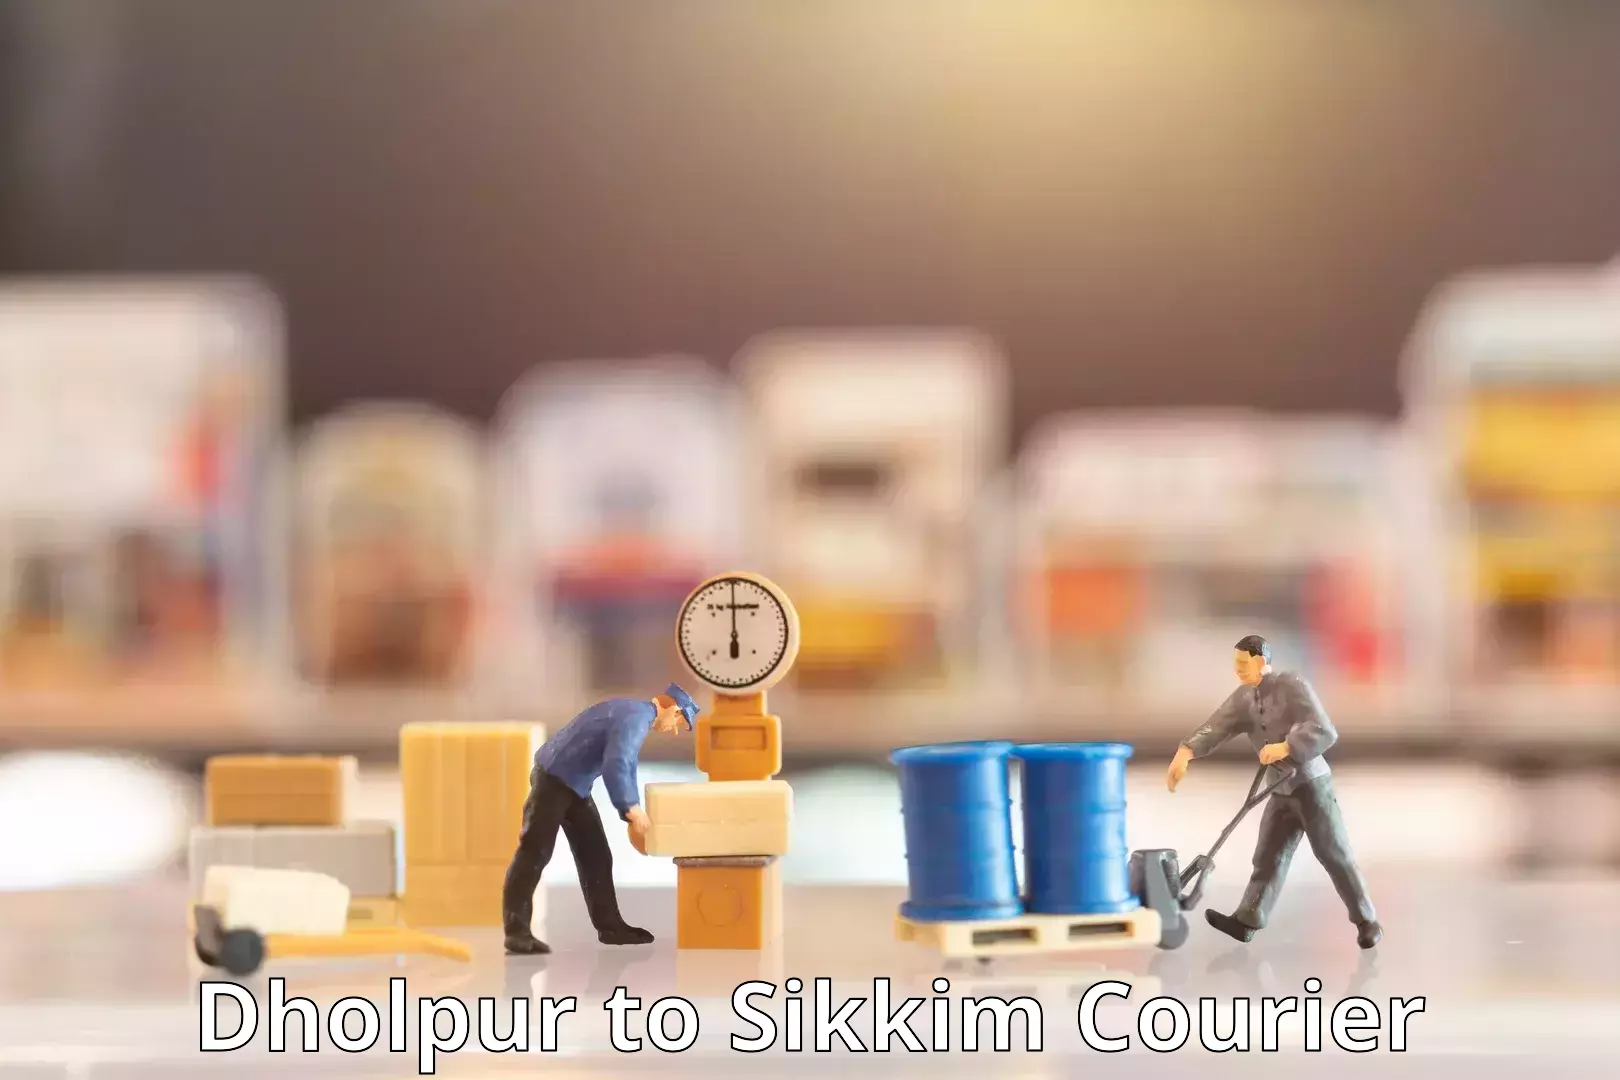 Global shipping networks Dholpur to Sikkim